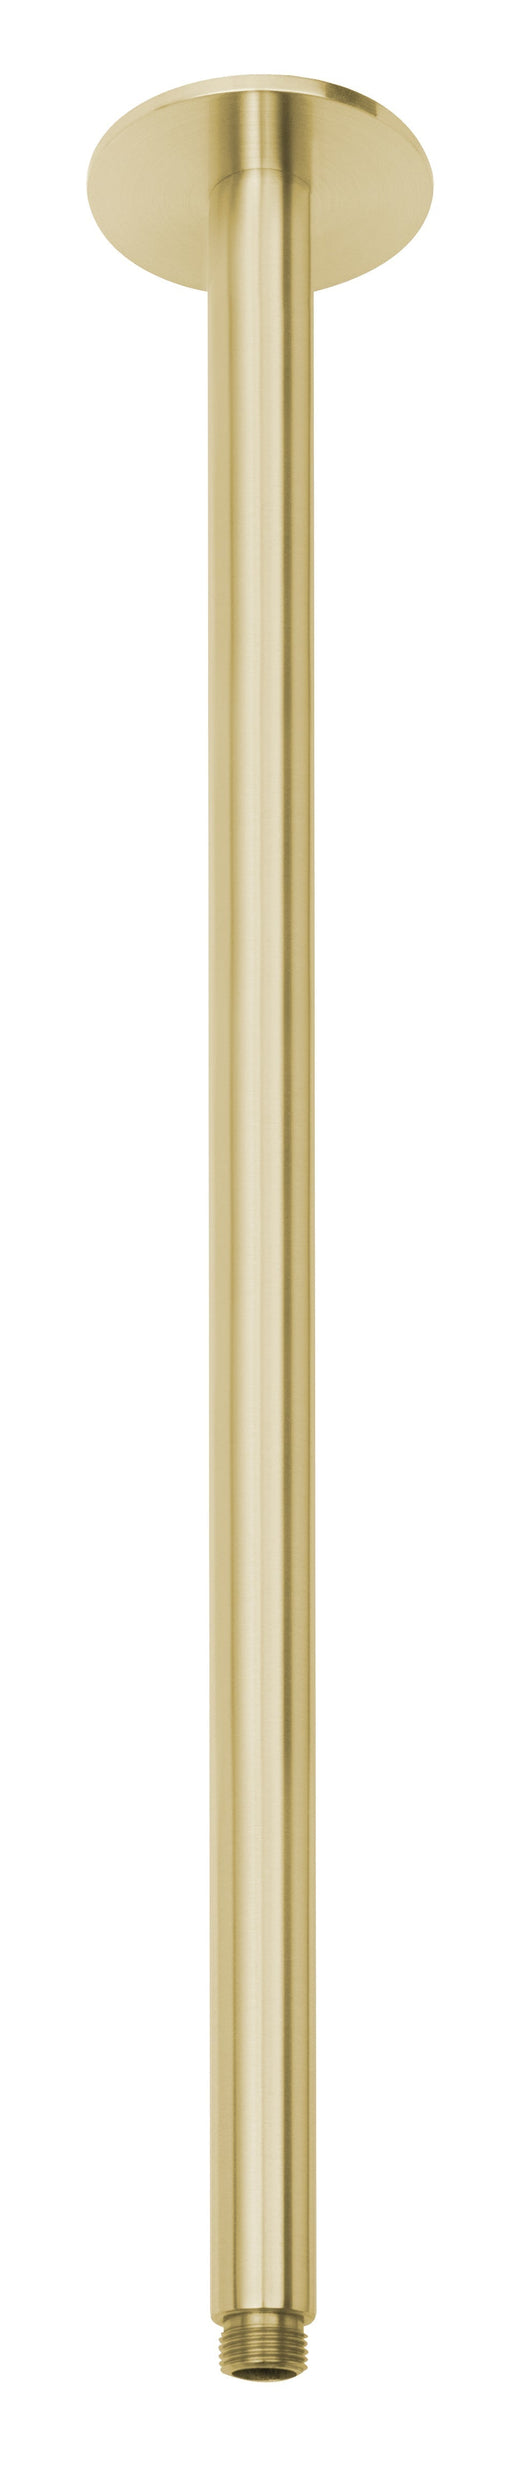 Vivid Ceiling Arm Only 450mm (Brushed Gold)